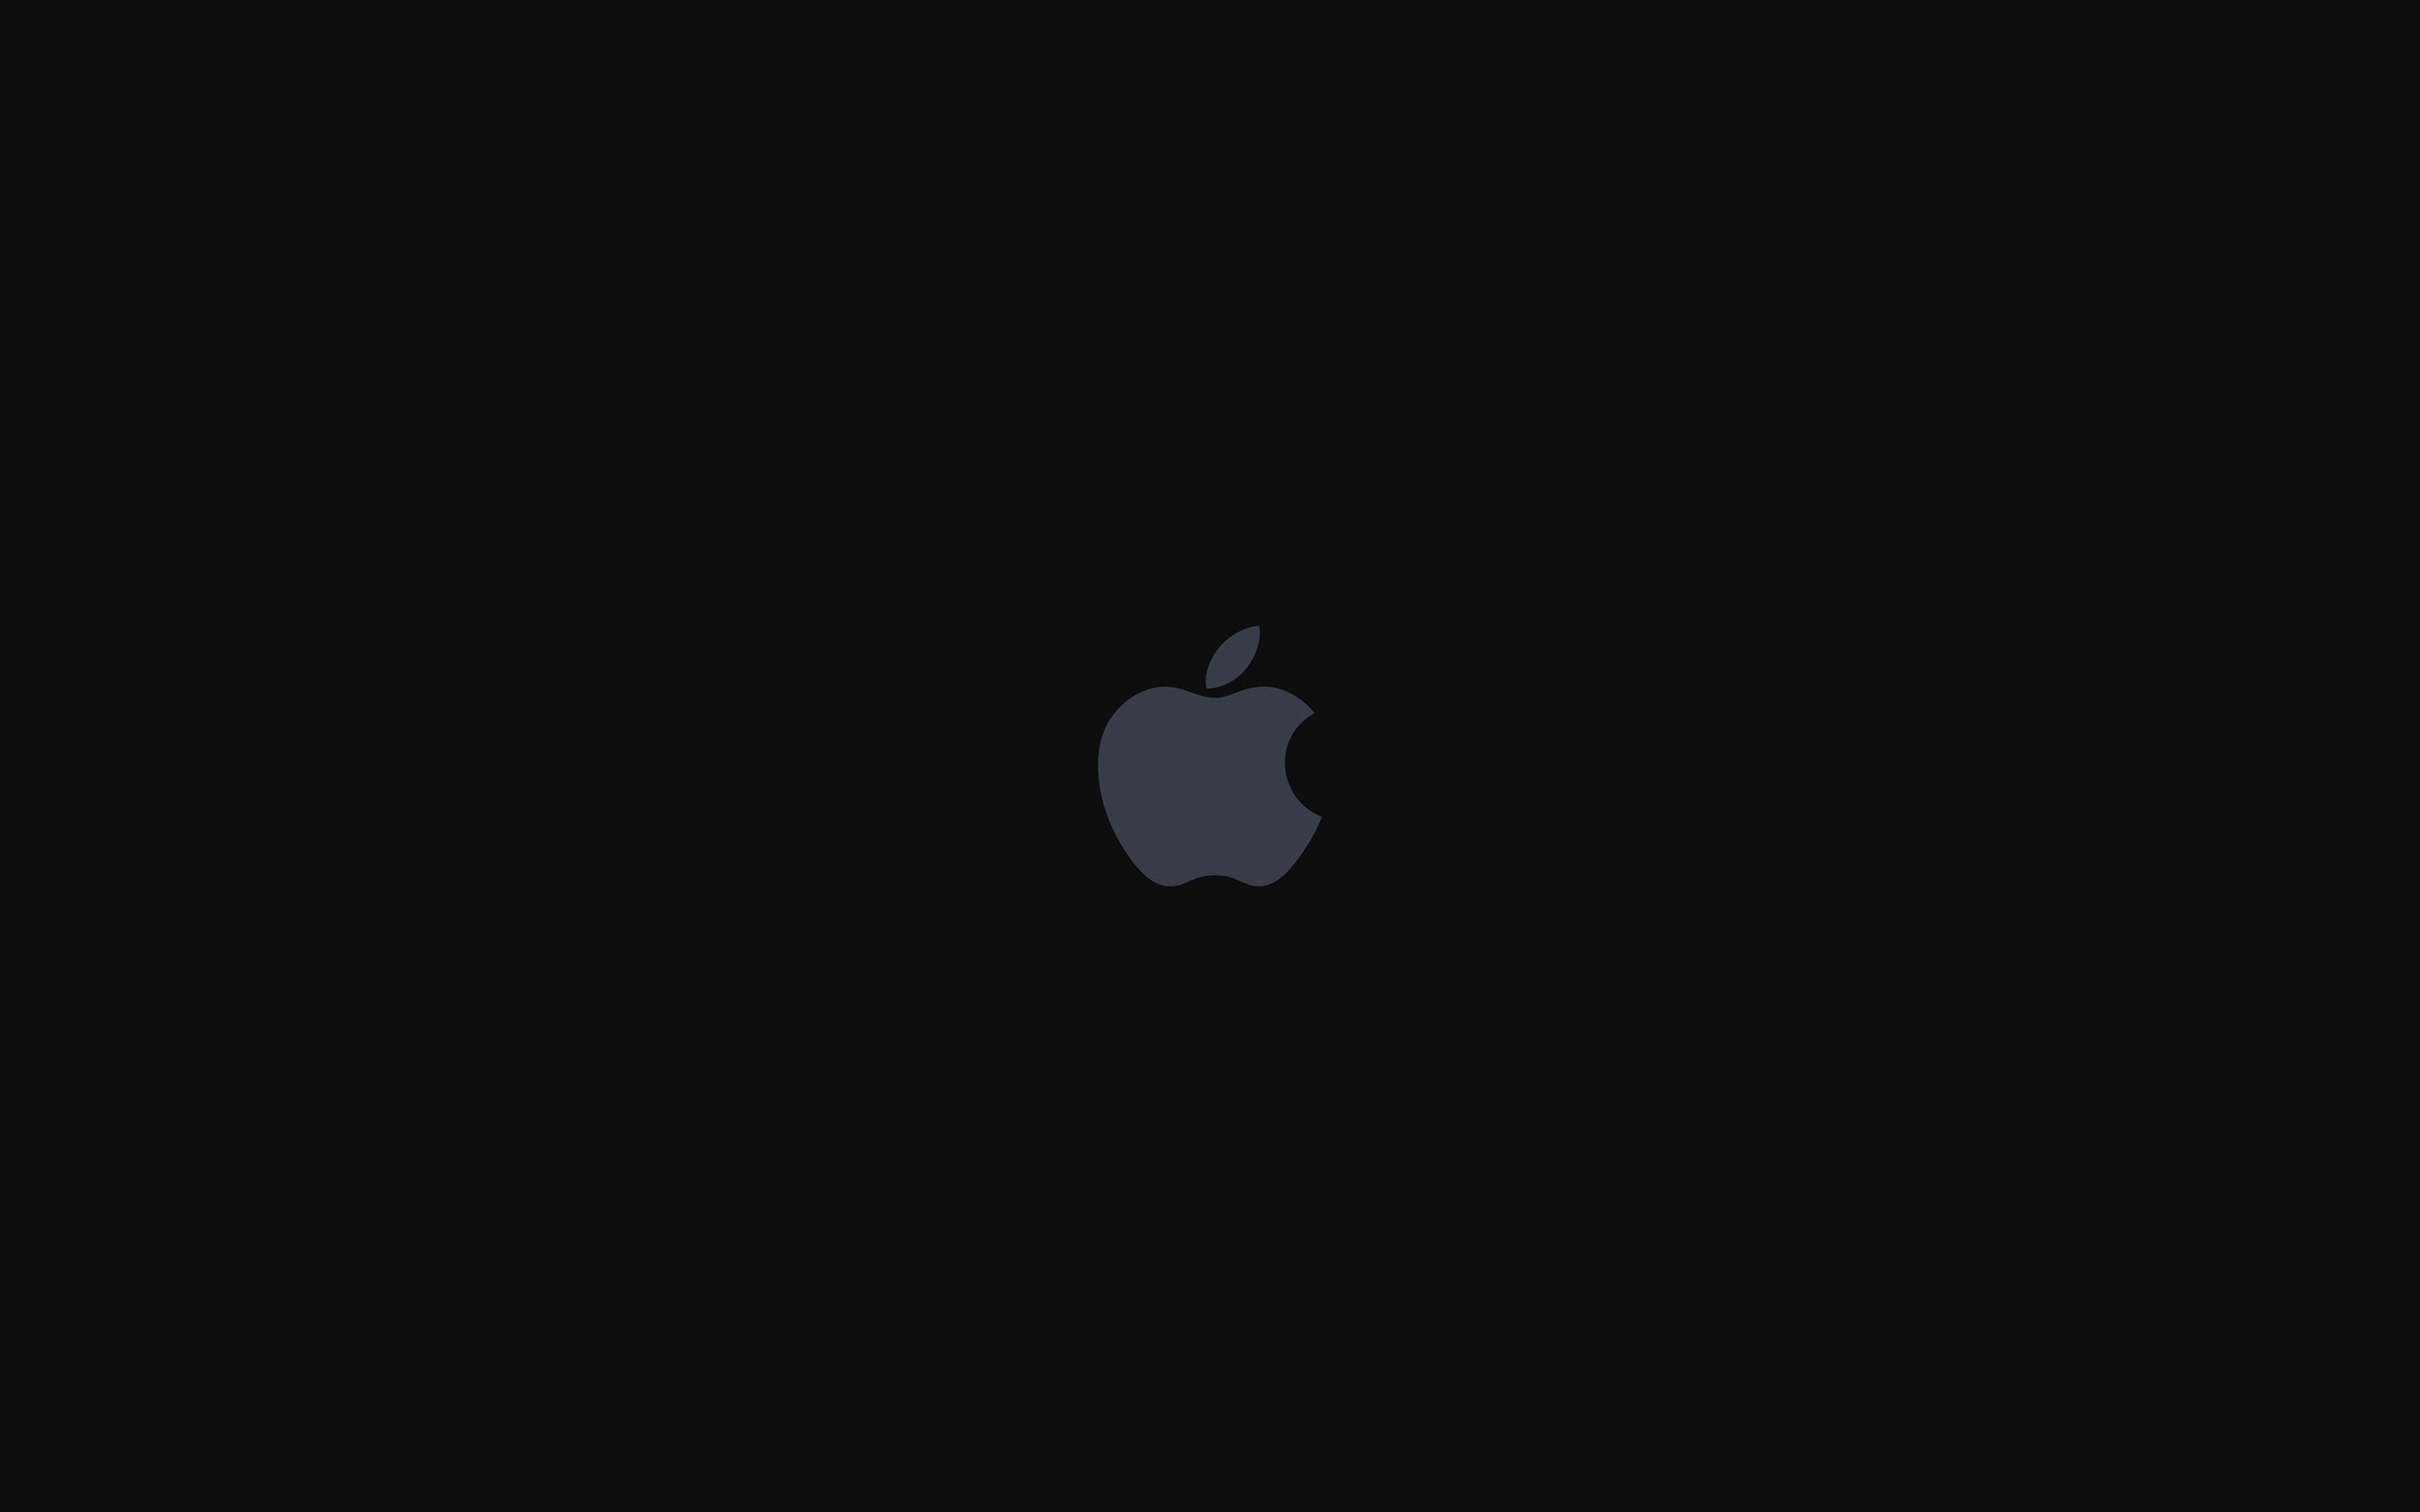 Download Apple logo black wallpaper by IvPv7  e9  Free on ZEDGE now  Browse millions of popula  Apple hintergrund iphone Hintergrund iphone  Handy hintergrund